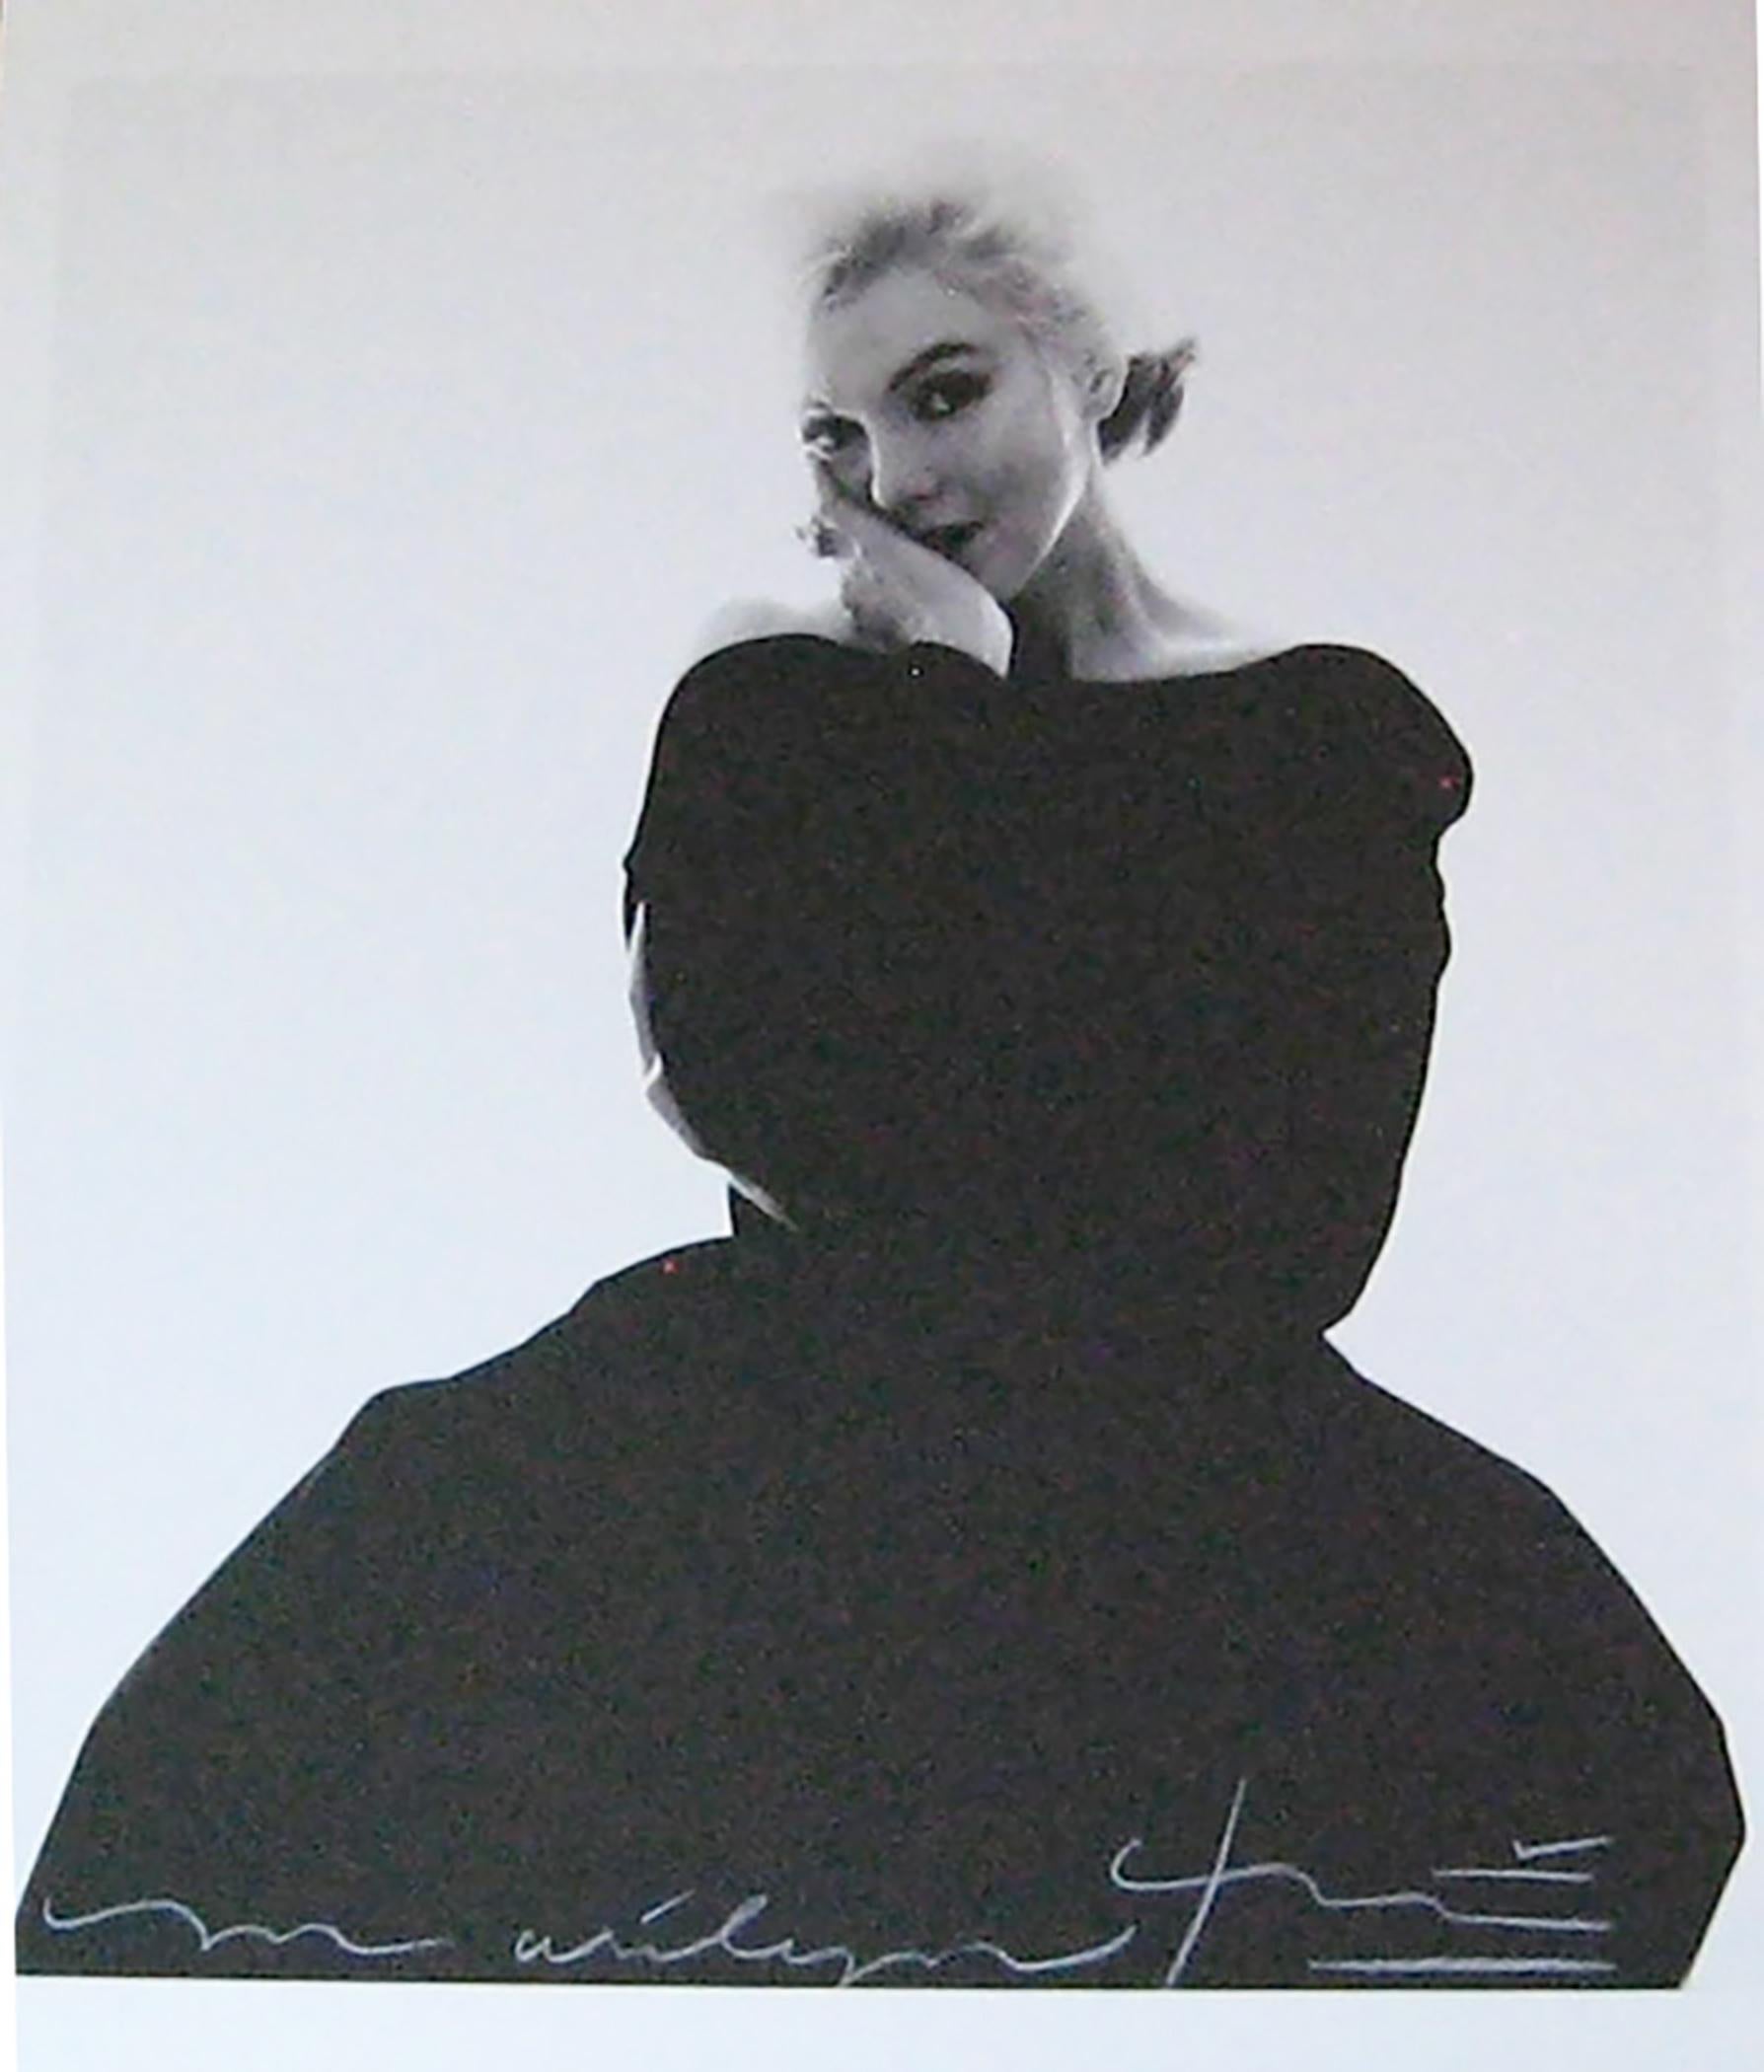 Bert stern
Marilyn looking at you in the Vogue dress
The last sitting (1962)
superb and large photo of Marilyn Monroe in Christian Dior's mythical black dress for Vogue magazine
photographic paper 
format 91 X61 cms
image 61 x 56 cms
signed and